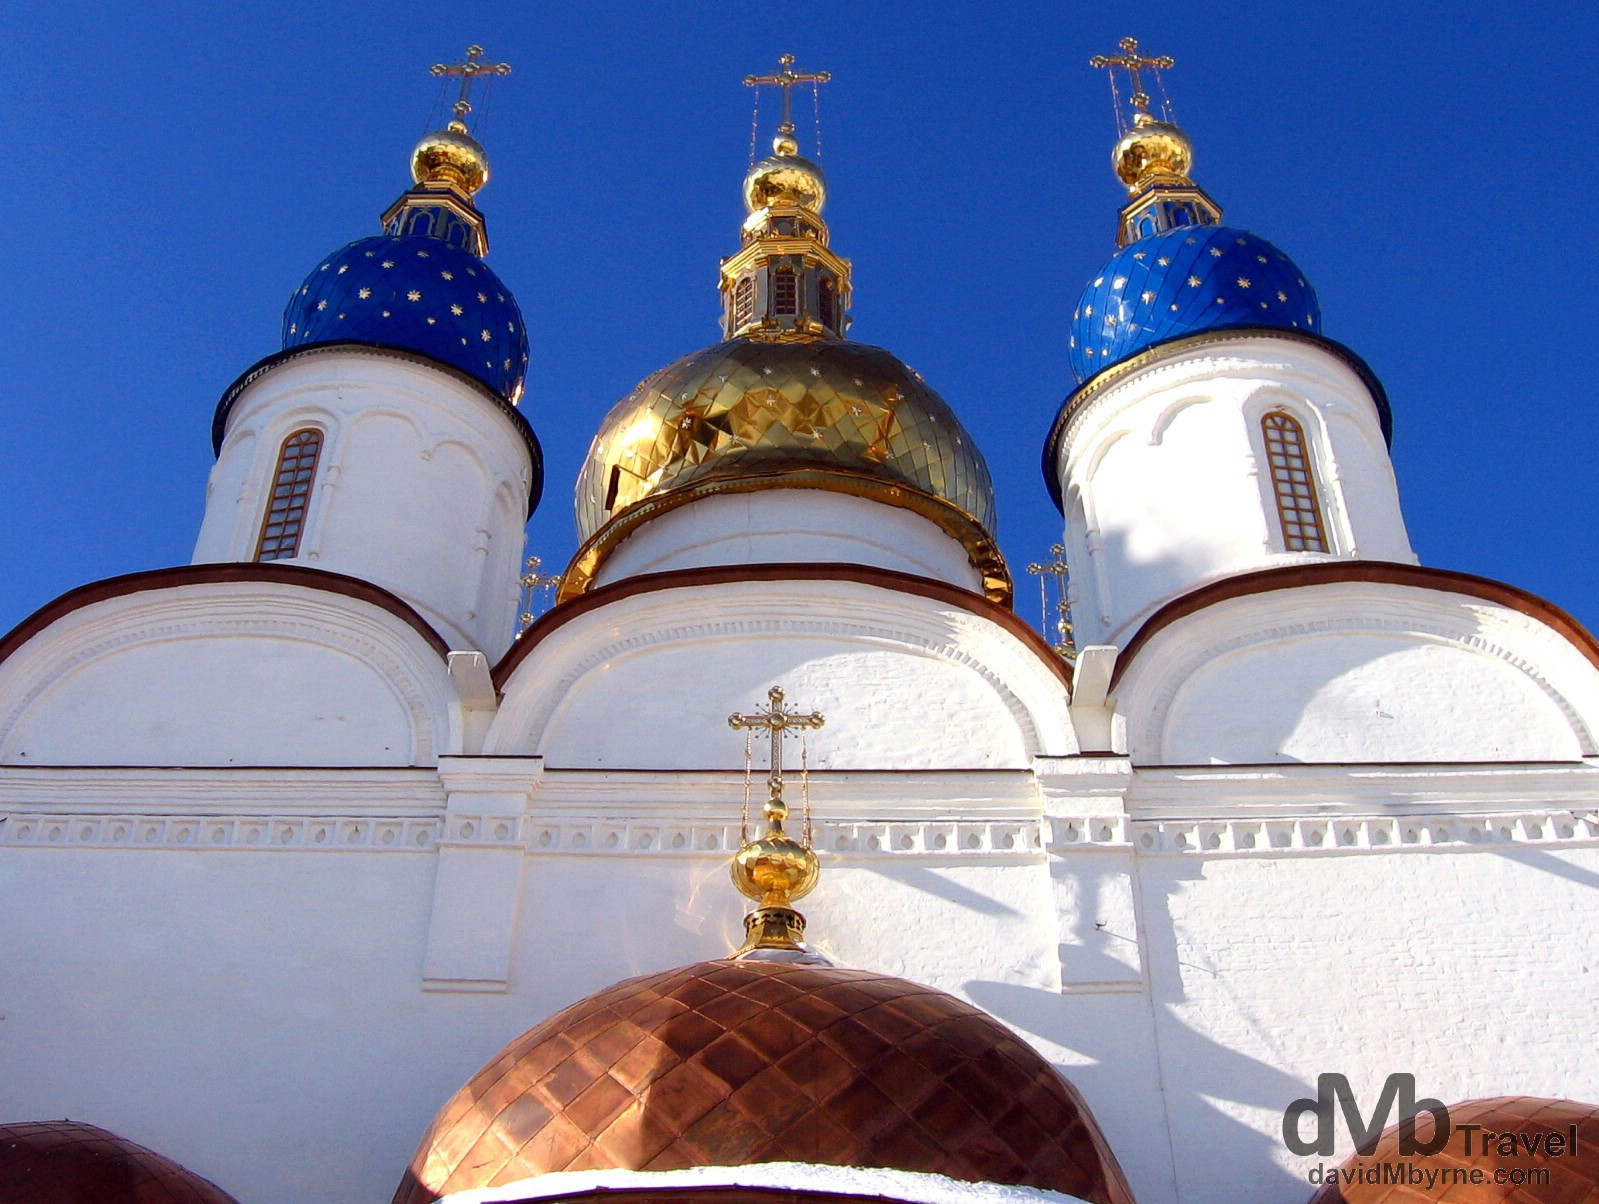 A section of the St. Sofia Cathedral of the Kremlin in Tobolsk, Siberian Russia. February 22nd, 2006.